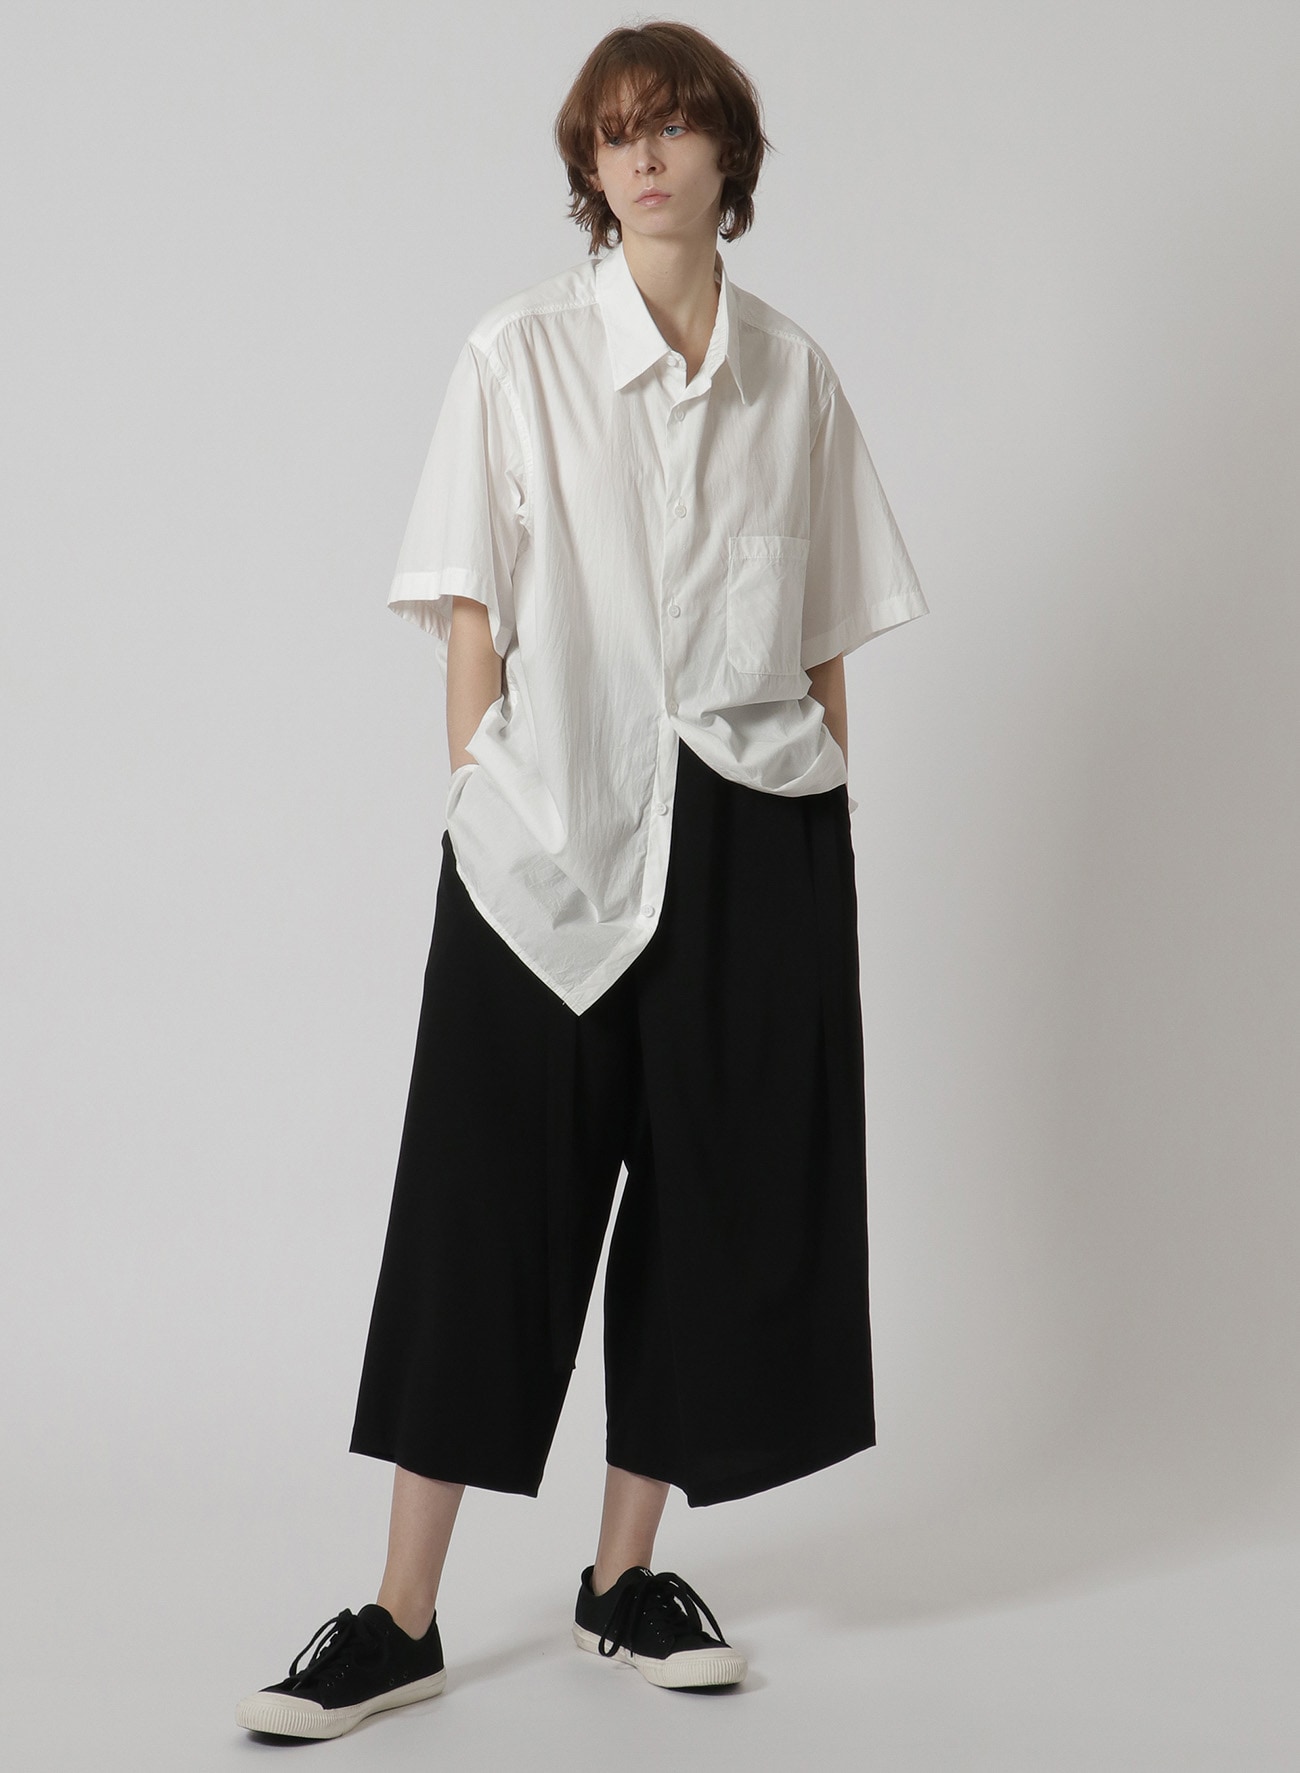 Y's-Black Name]COTTON STANDARD SHORT SLEEVE SHIRT(S White): Y's 